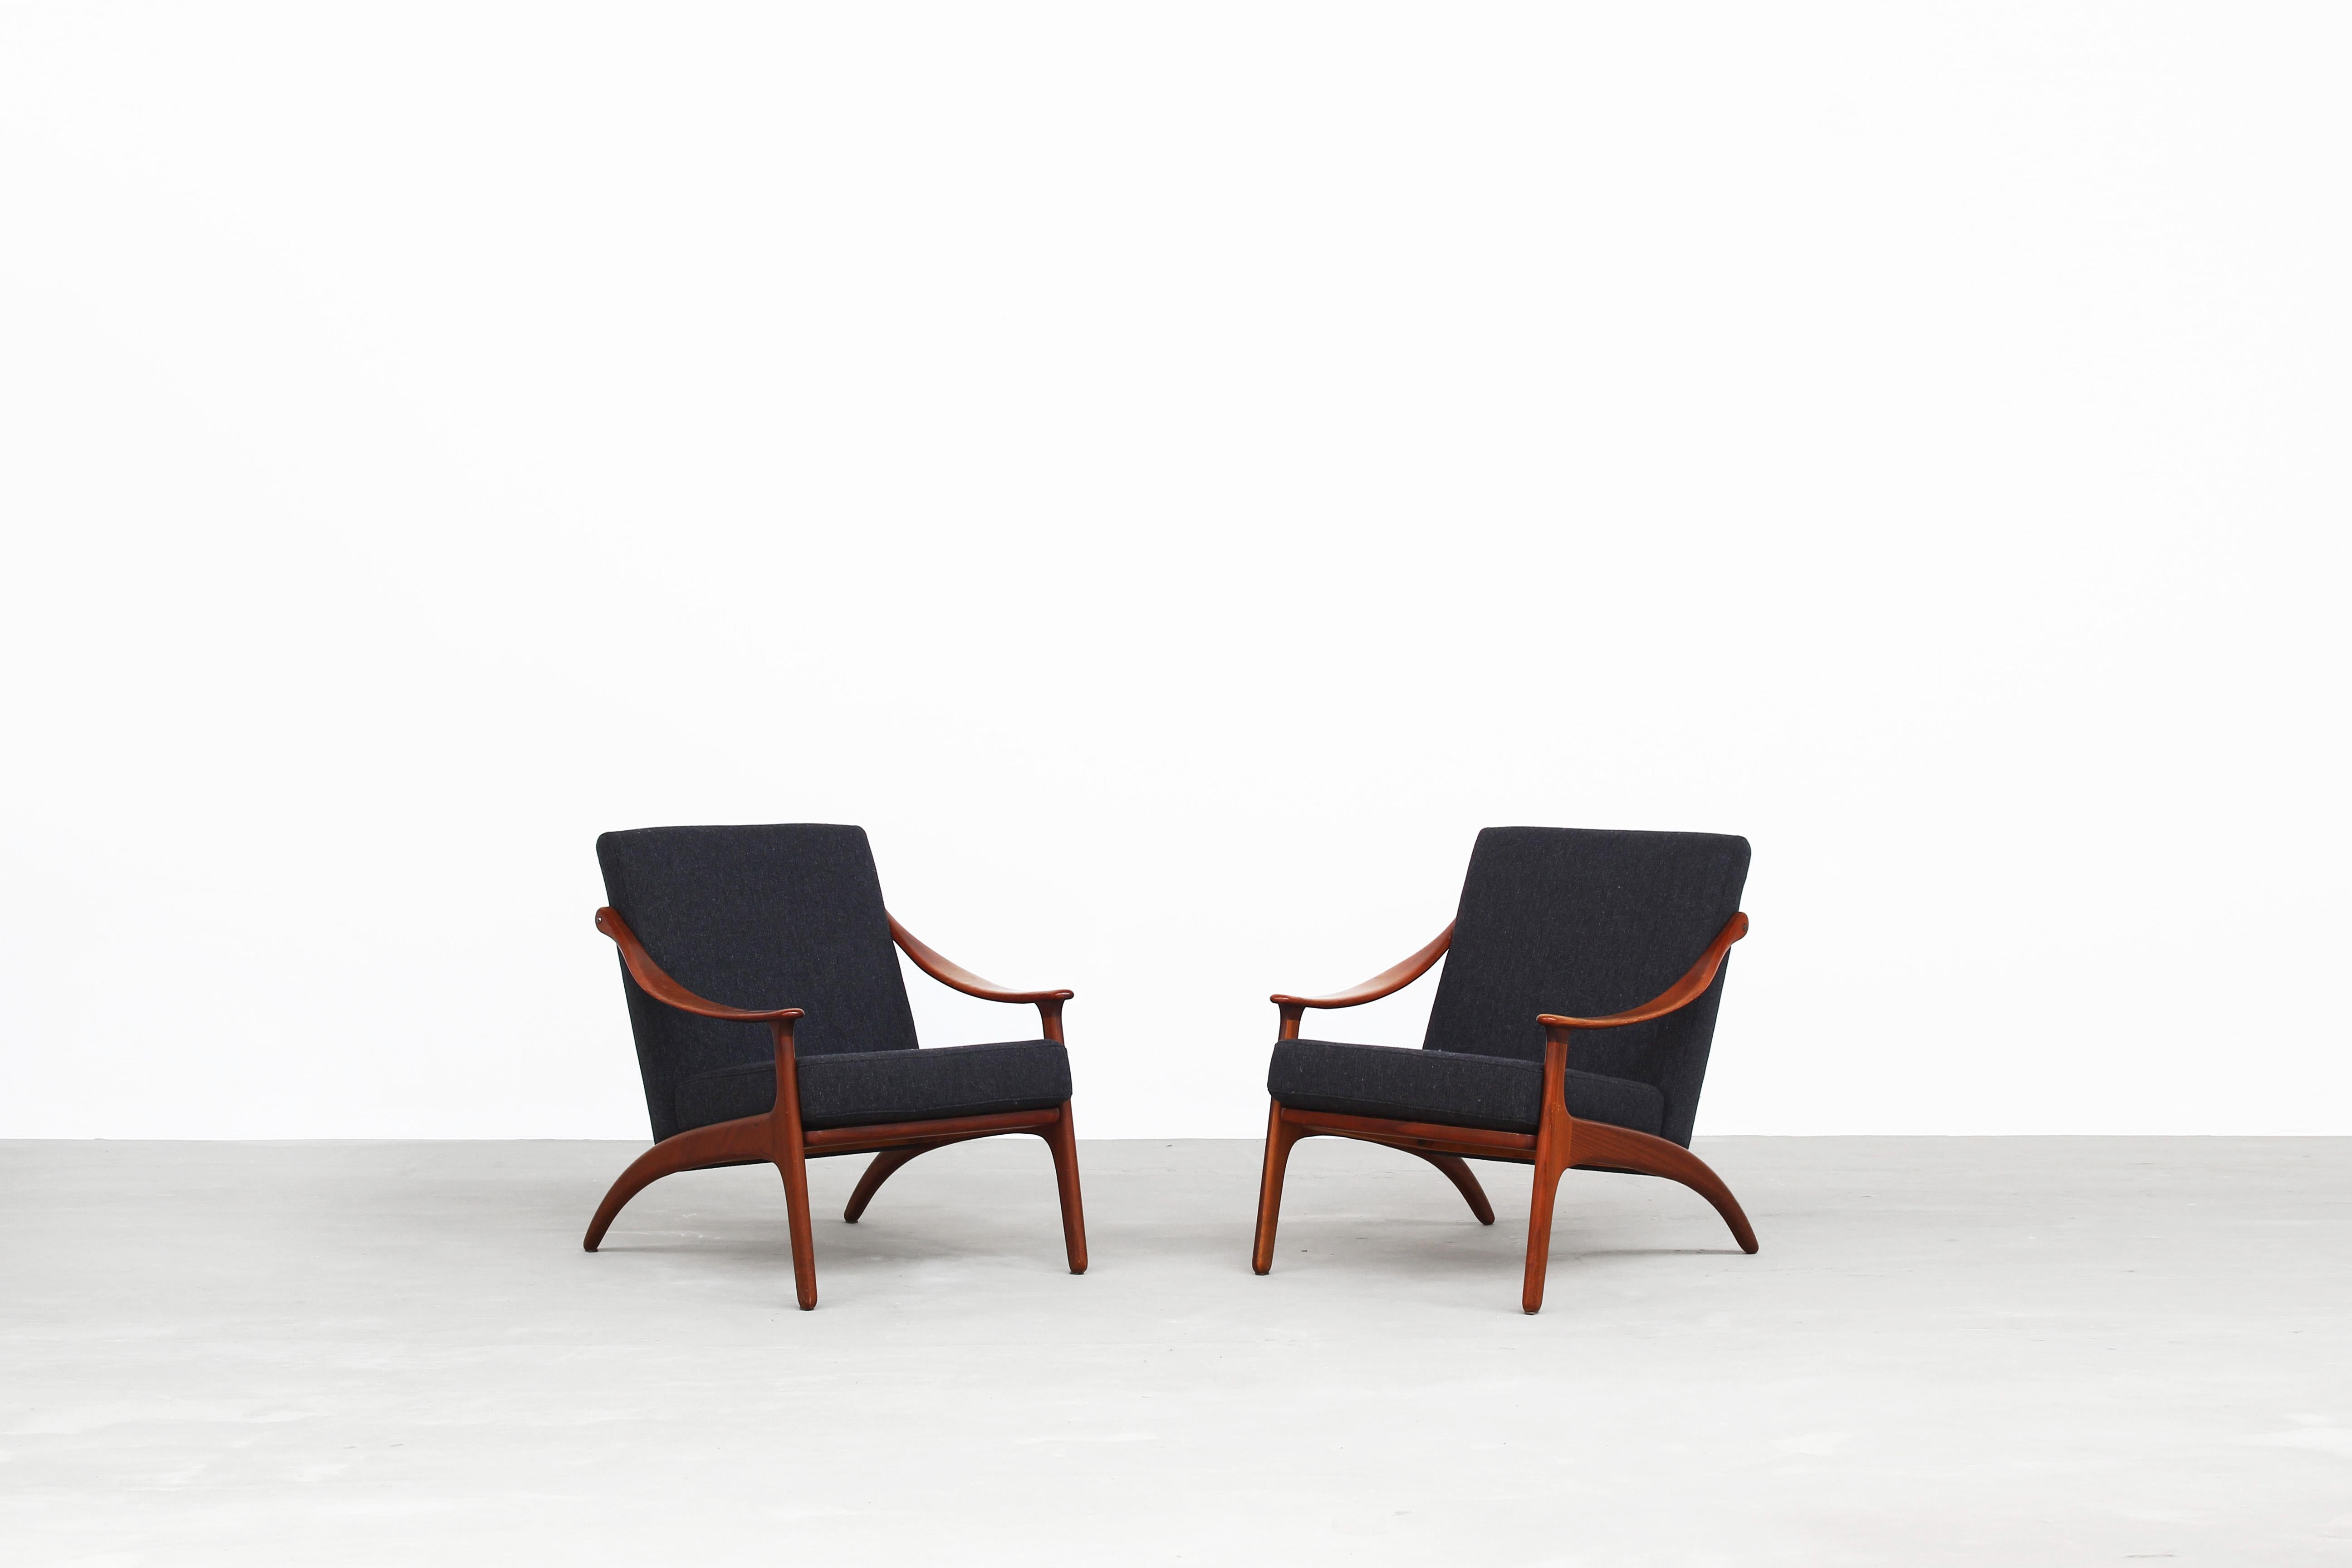 A very beautiful und rare set designed by Arne Hovmand-Olsen for Mogens Kold in the 1950s, made in Denmark. Both lounge chairs are in a very good condition with just little traces of usage on the teakwood frame. The cover and the cushions were newly